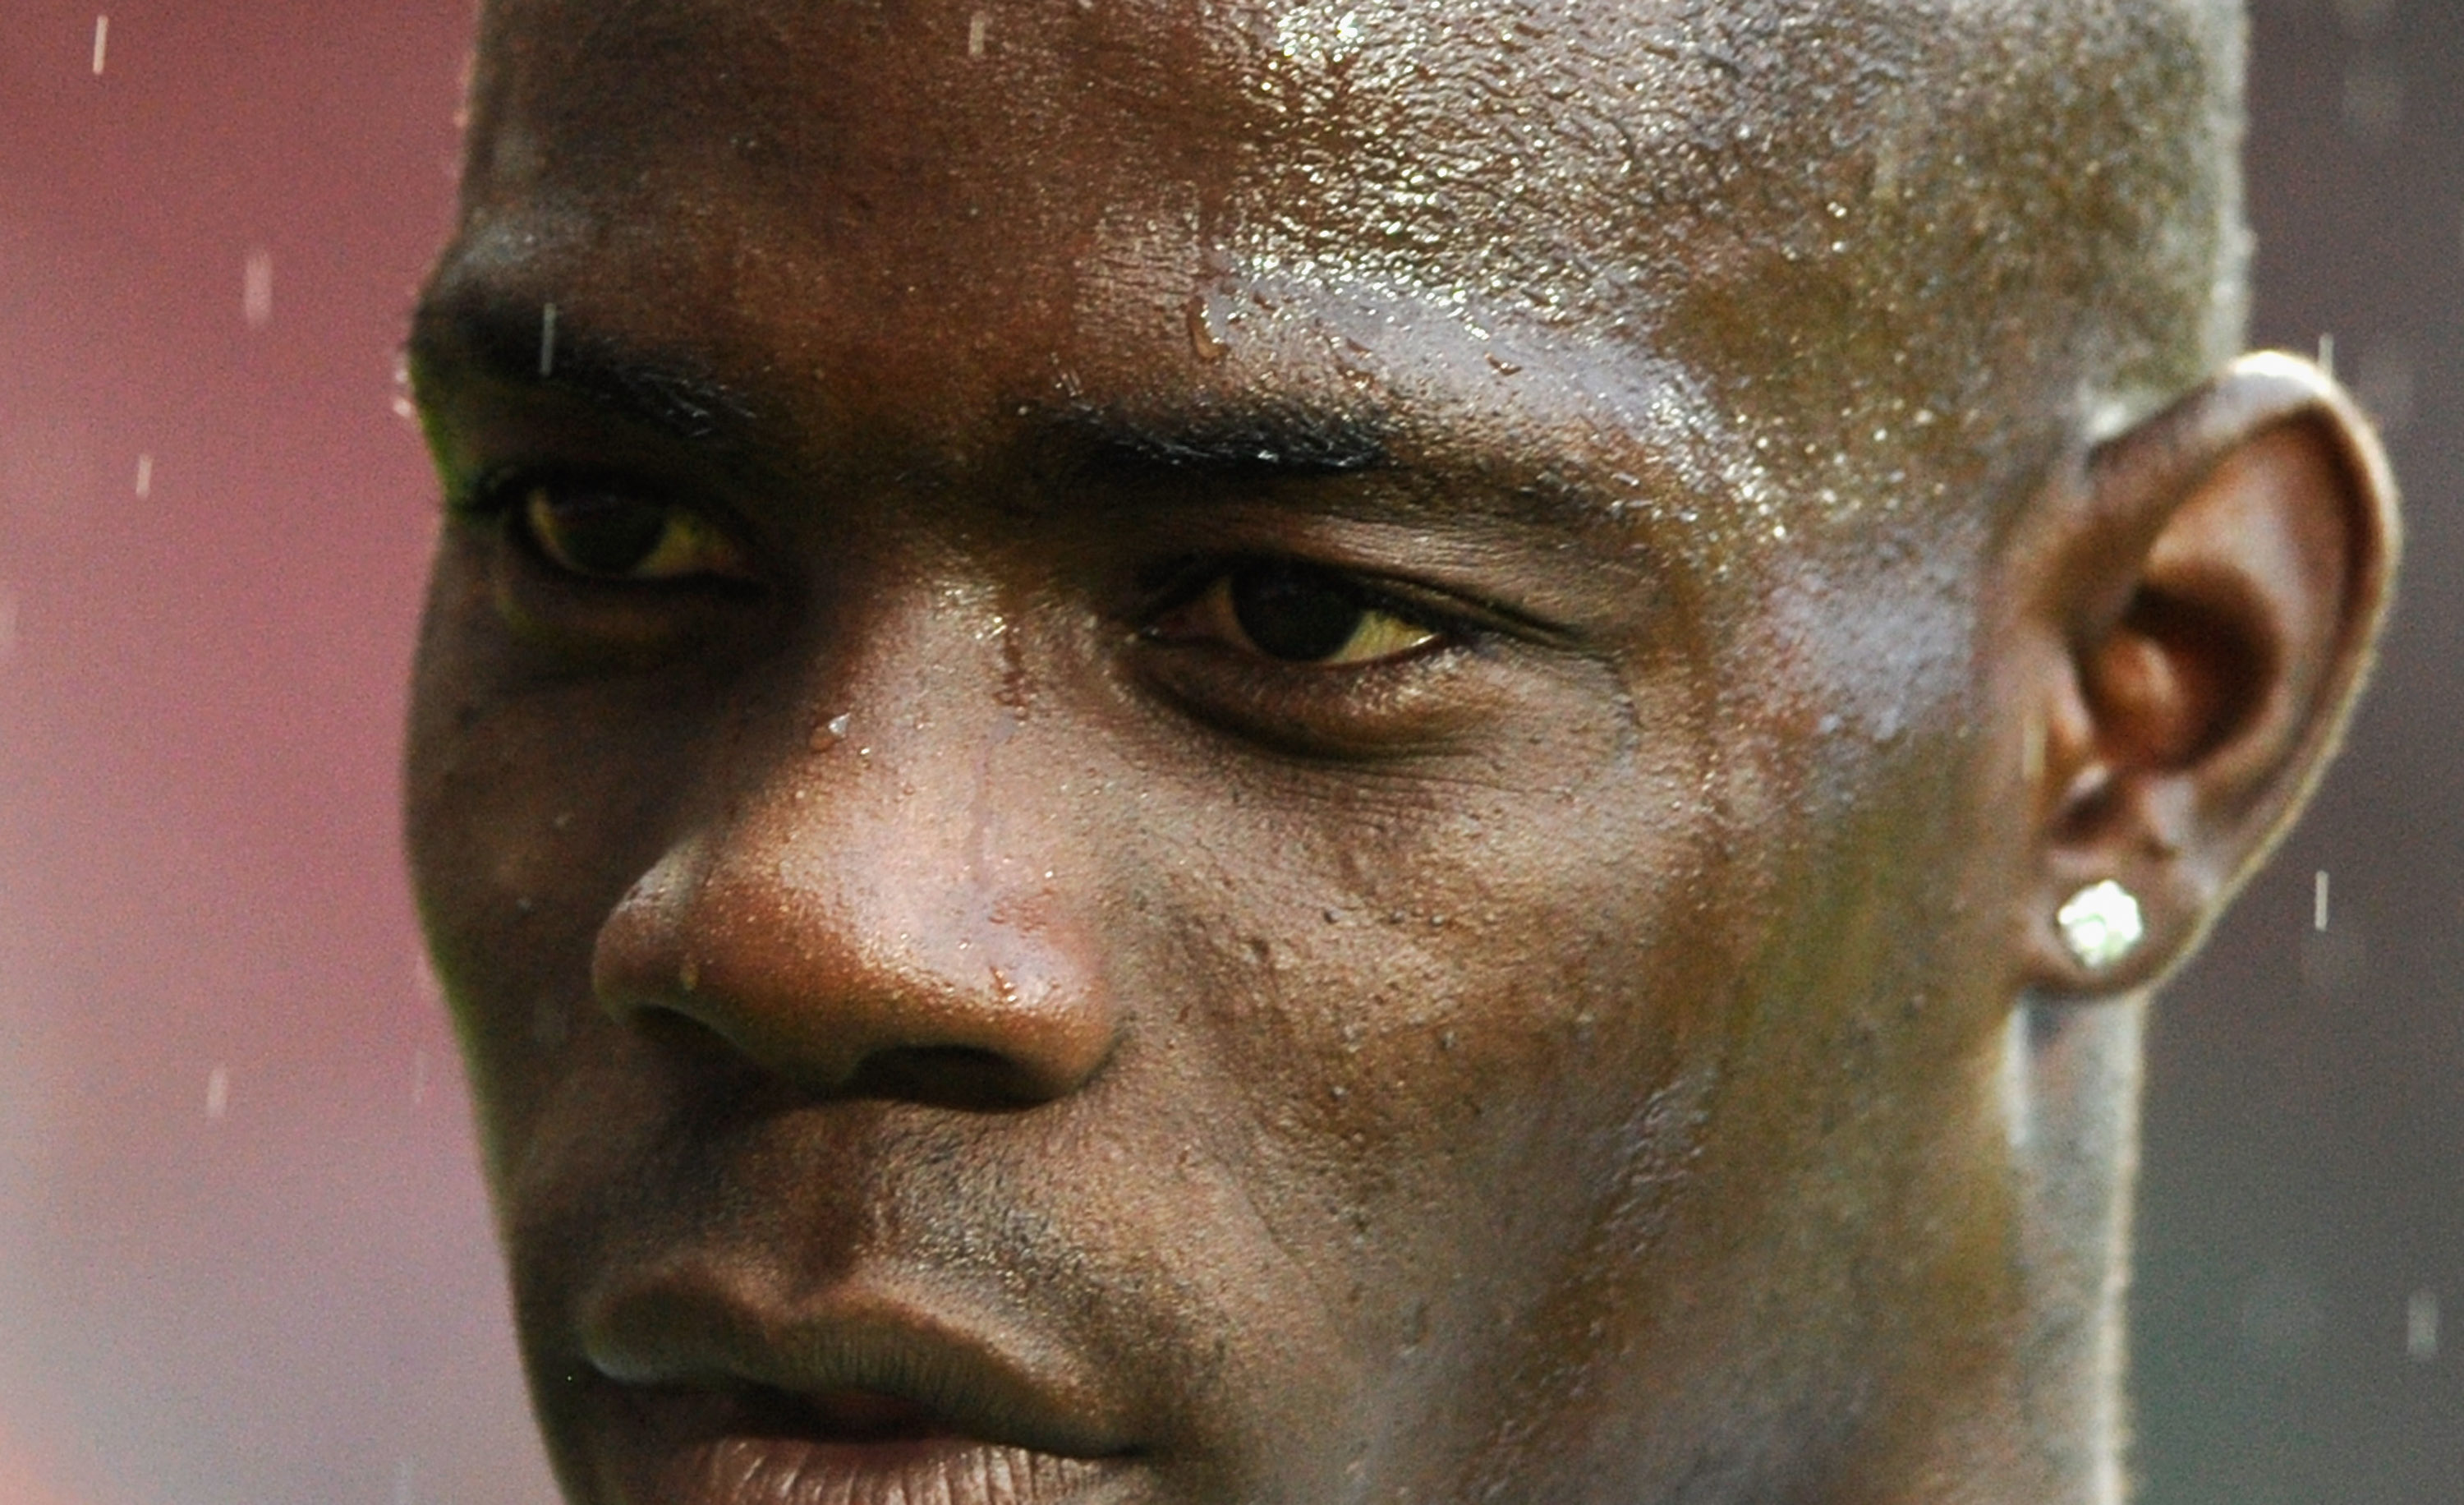 LONDON, ENGLAND - AUGUST 10:  Mario Balotelli of Italy during the international friendly match between Italy and Ivory Coast at The Boleyn Ground on August 10, 2010 in London, England.  (Photo by Claudio Villa/Getty Images)